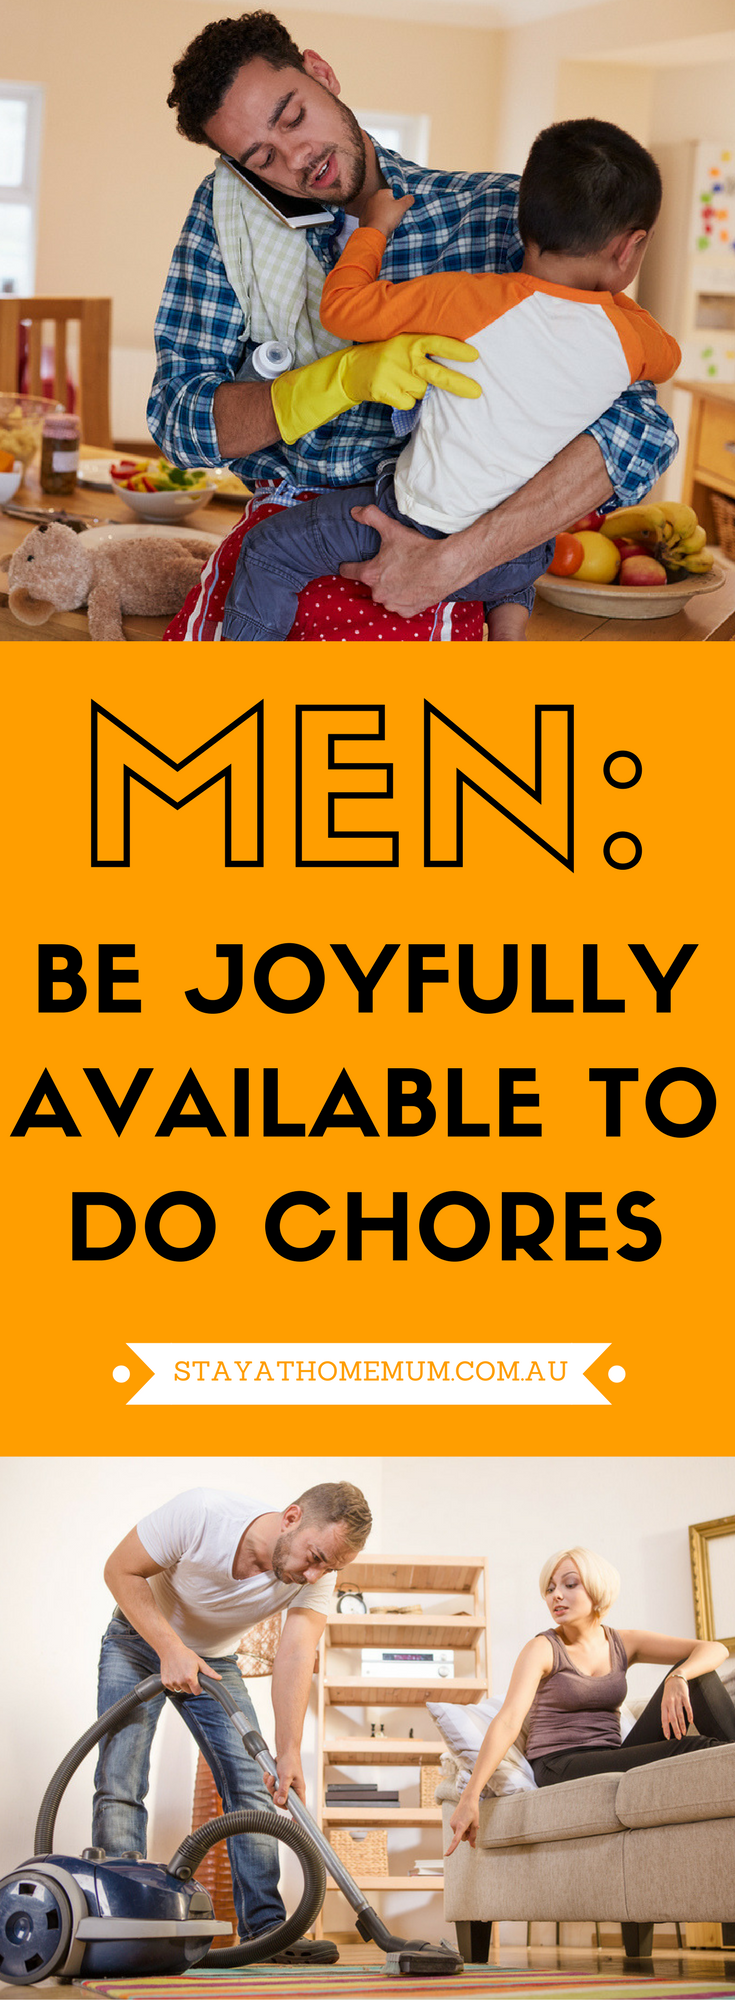 Men Be Joyfully Available To Do Chores 1 | Stay at Home Mum.com.au